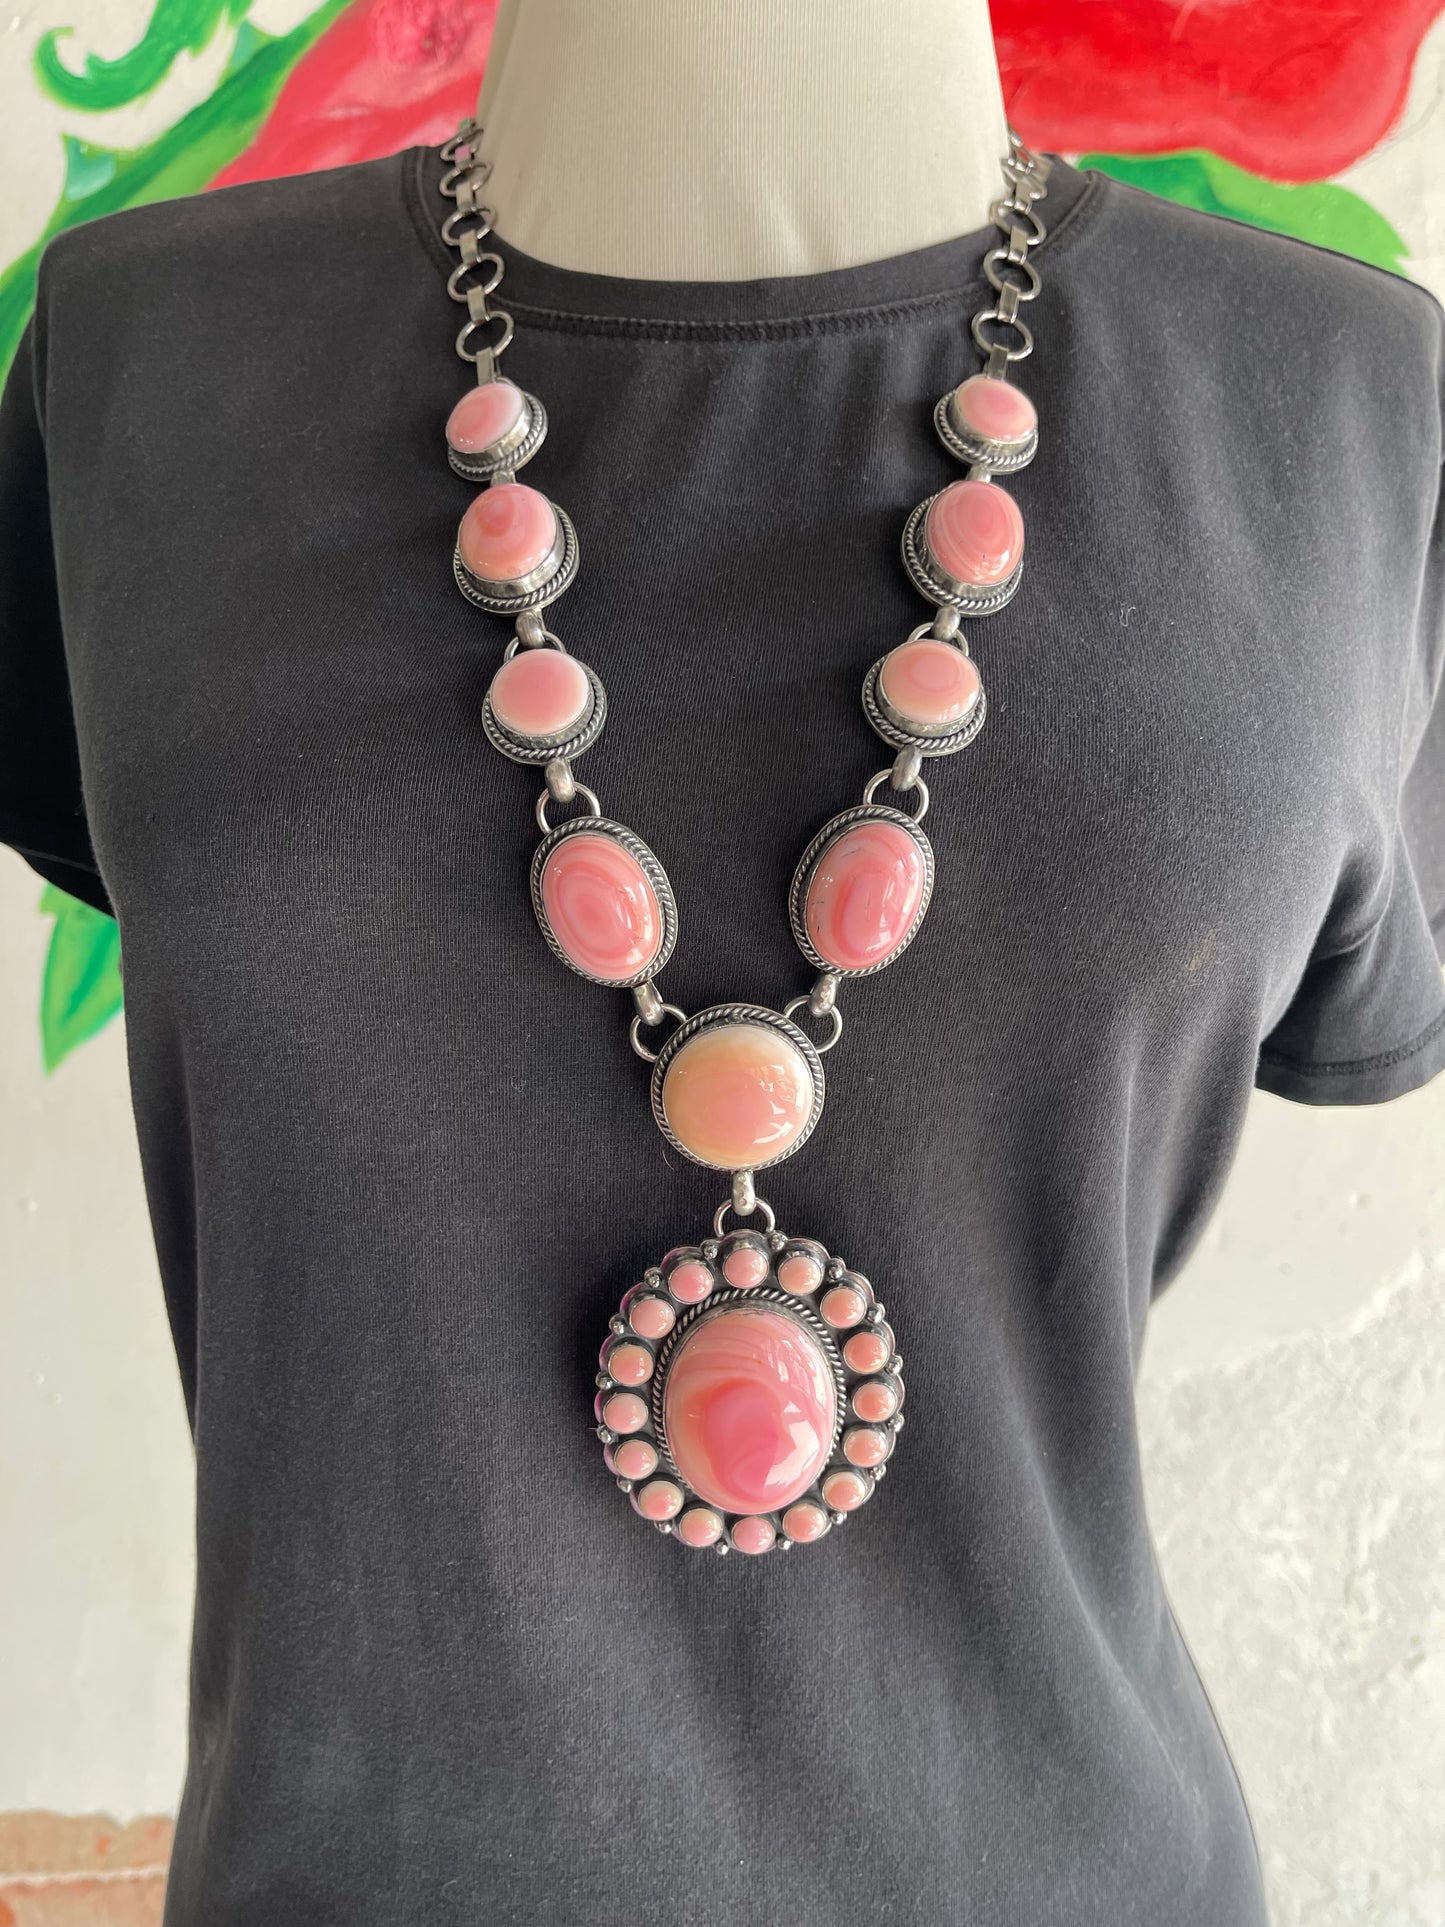 Cotton Candy (Pink Conch Shell) Lariat 29" Necklace